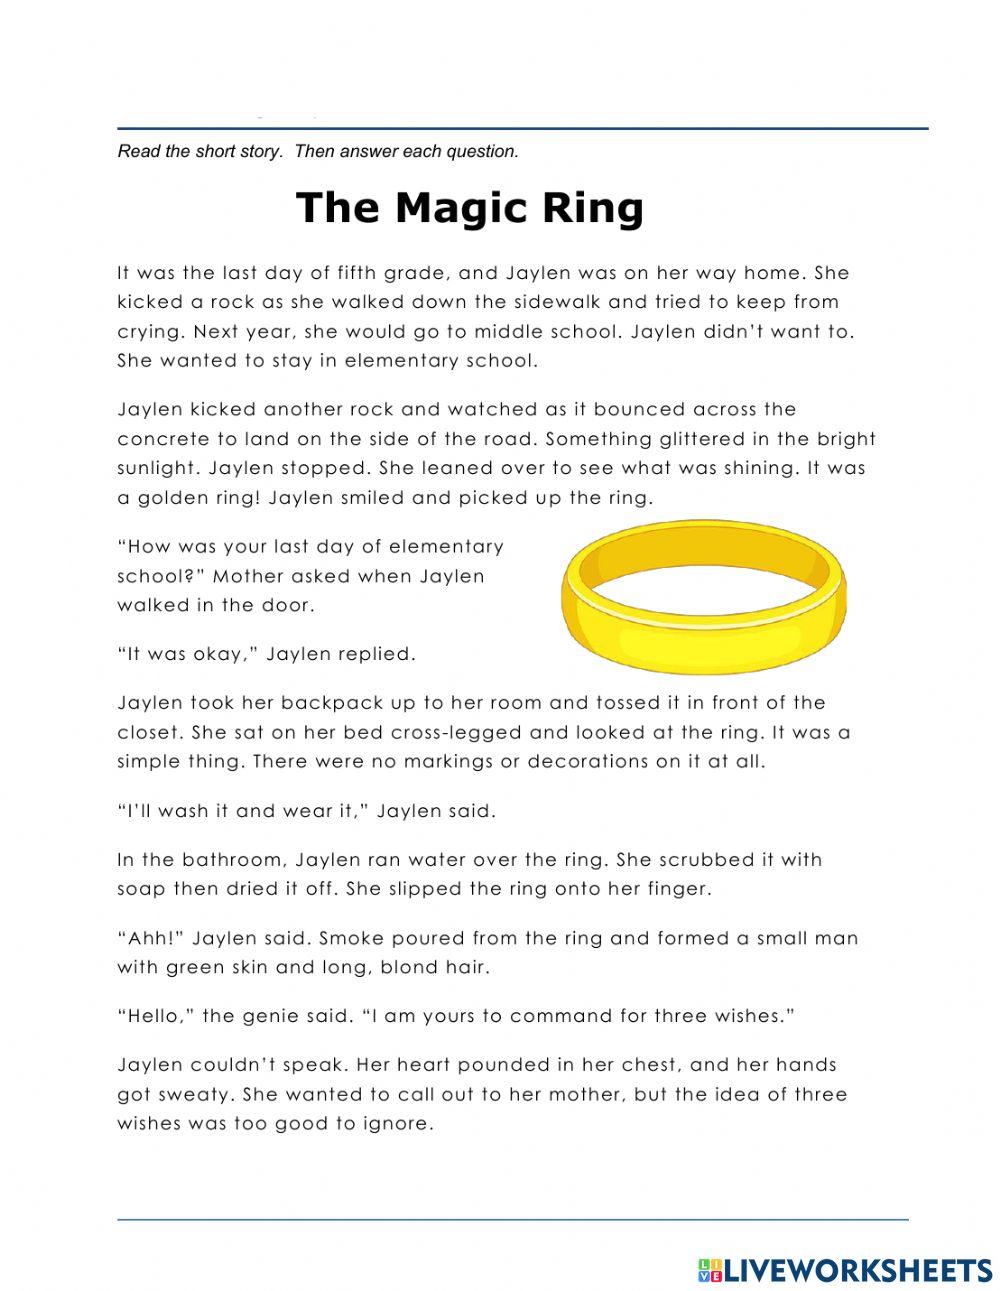 Admirable Animations: The Magic Ring by JCFanfics on DeviantArt